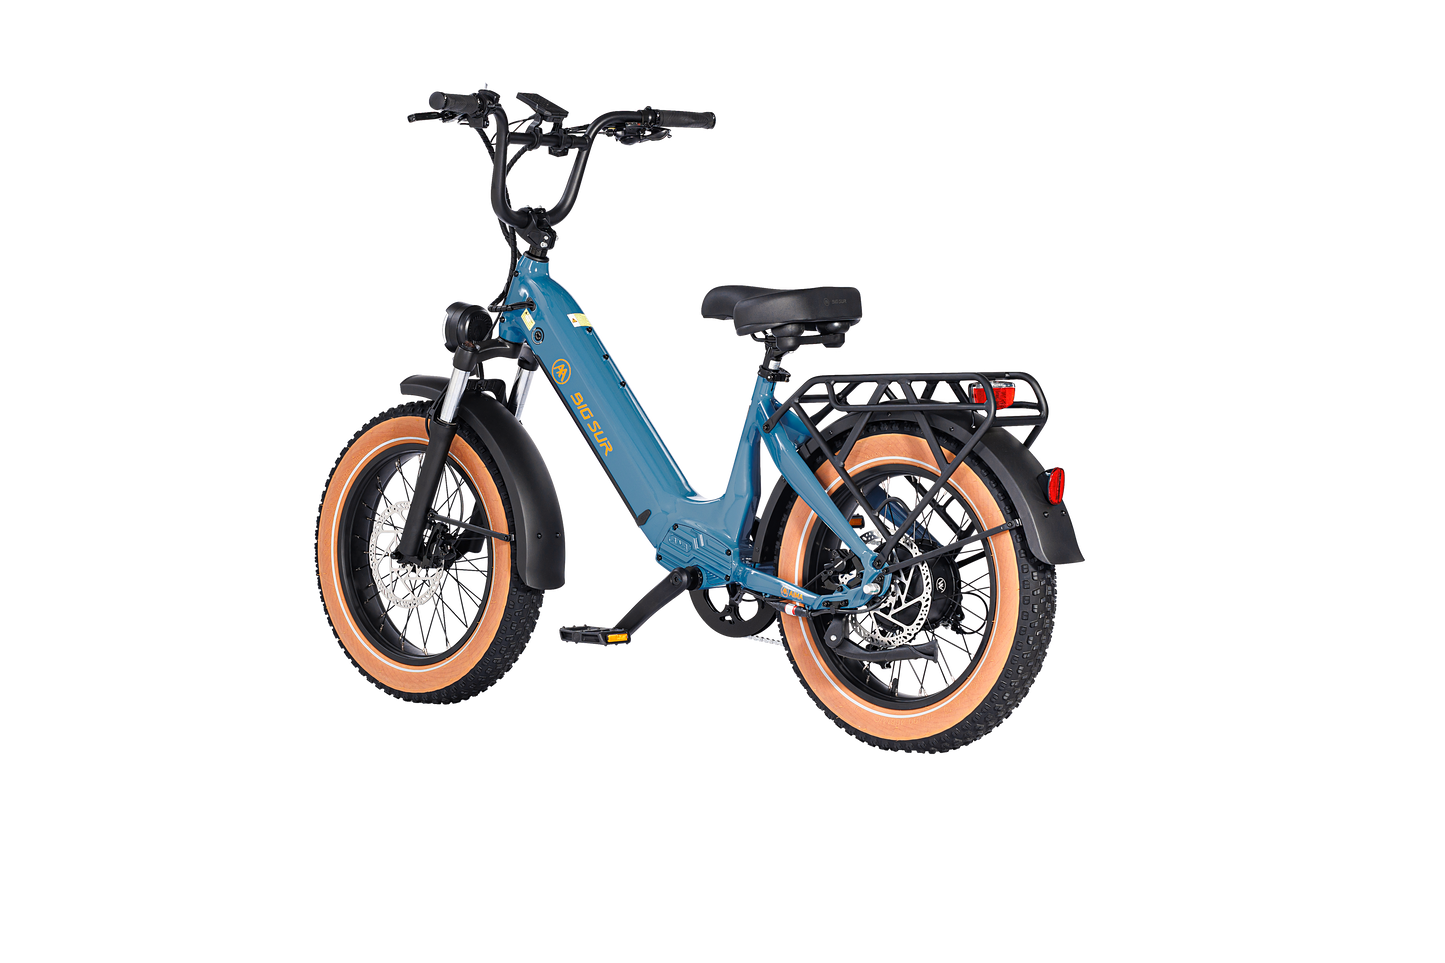 The AIMA - Big Sur Sport electric bicycle features a blue frame, tan tires, black saddle, and rear cargo rack, shown on a white background. With UL2849 certification ensuring safety and reliability, this sleek design is perfect for all your riding needs.